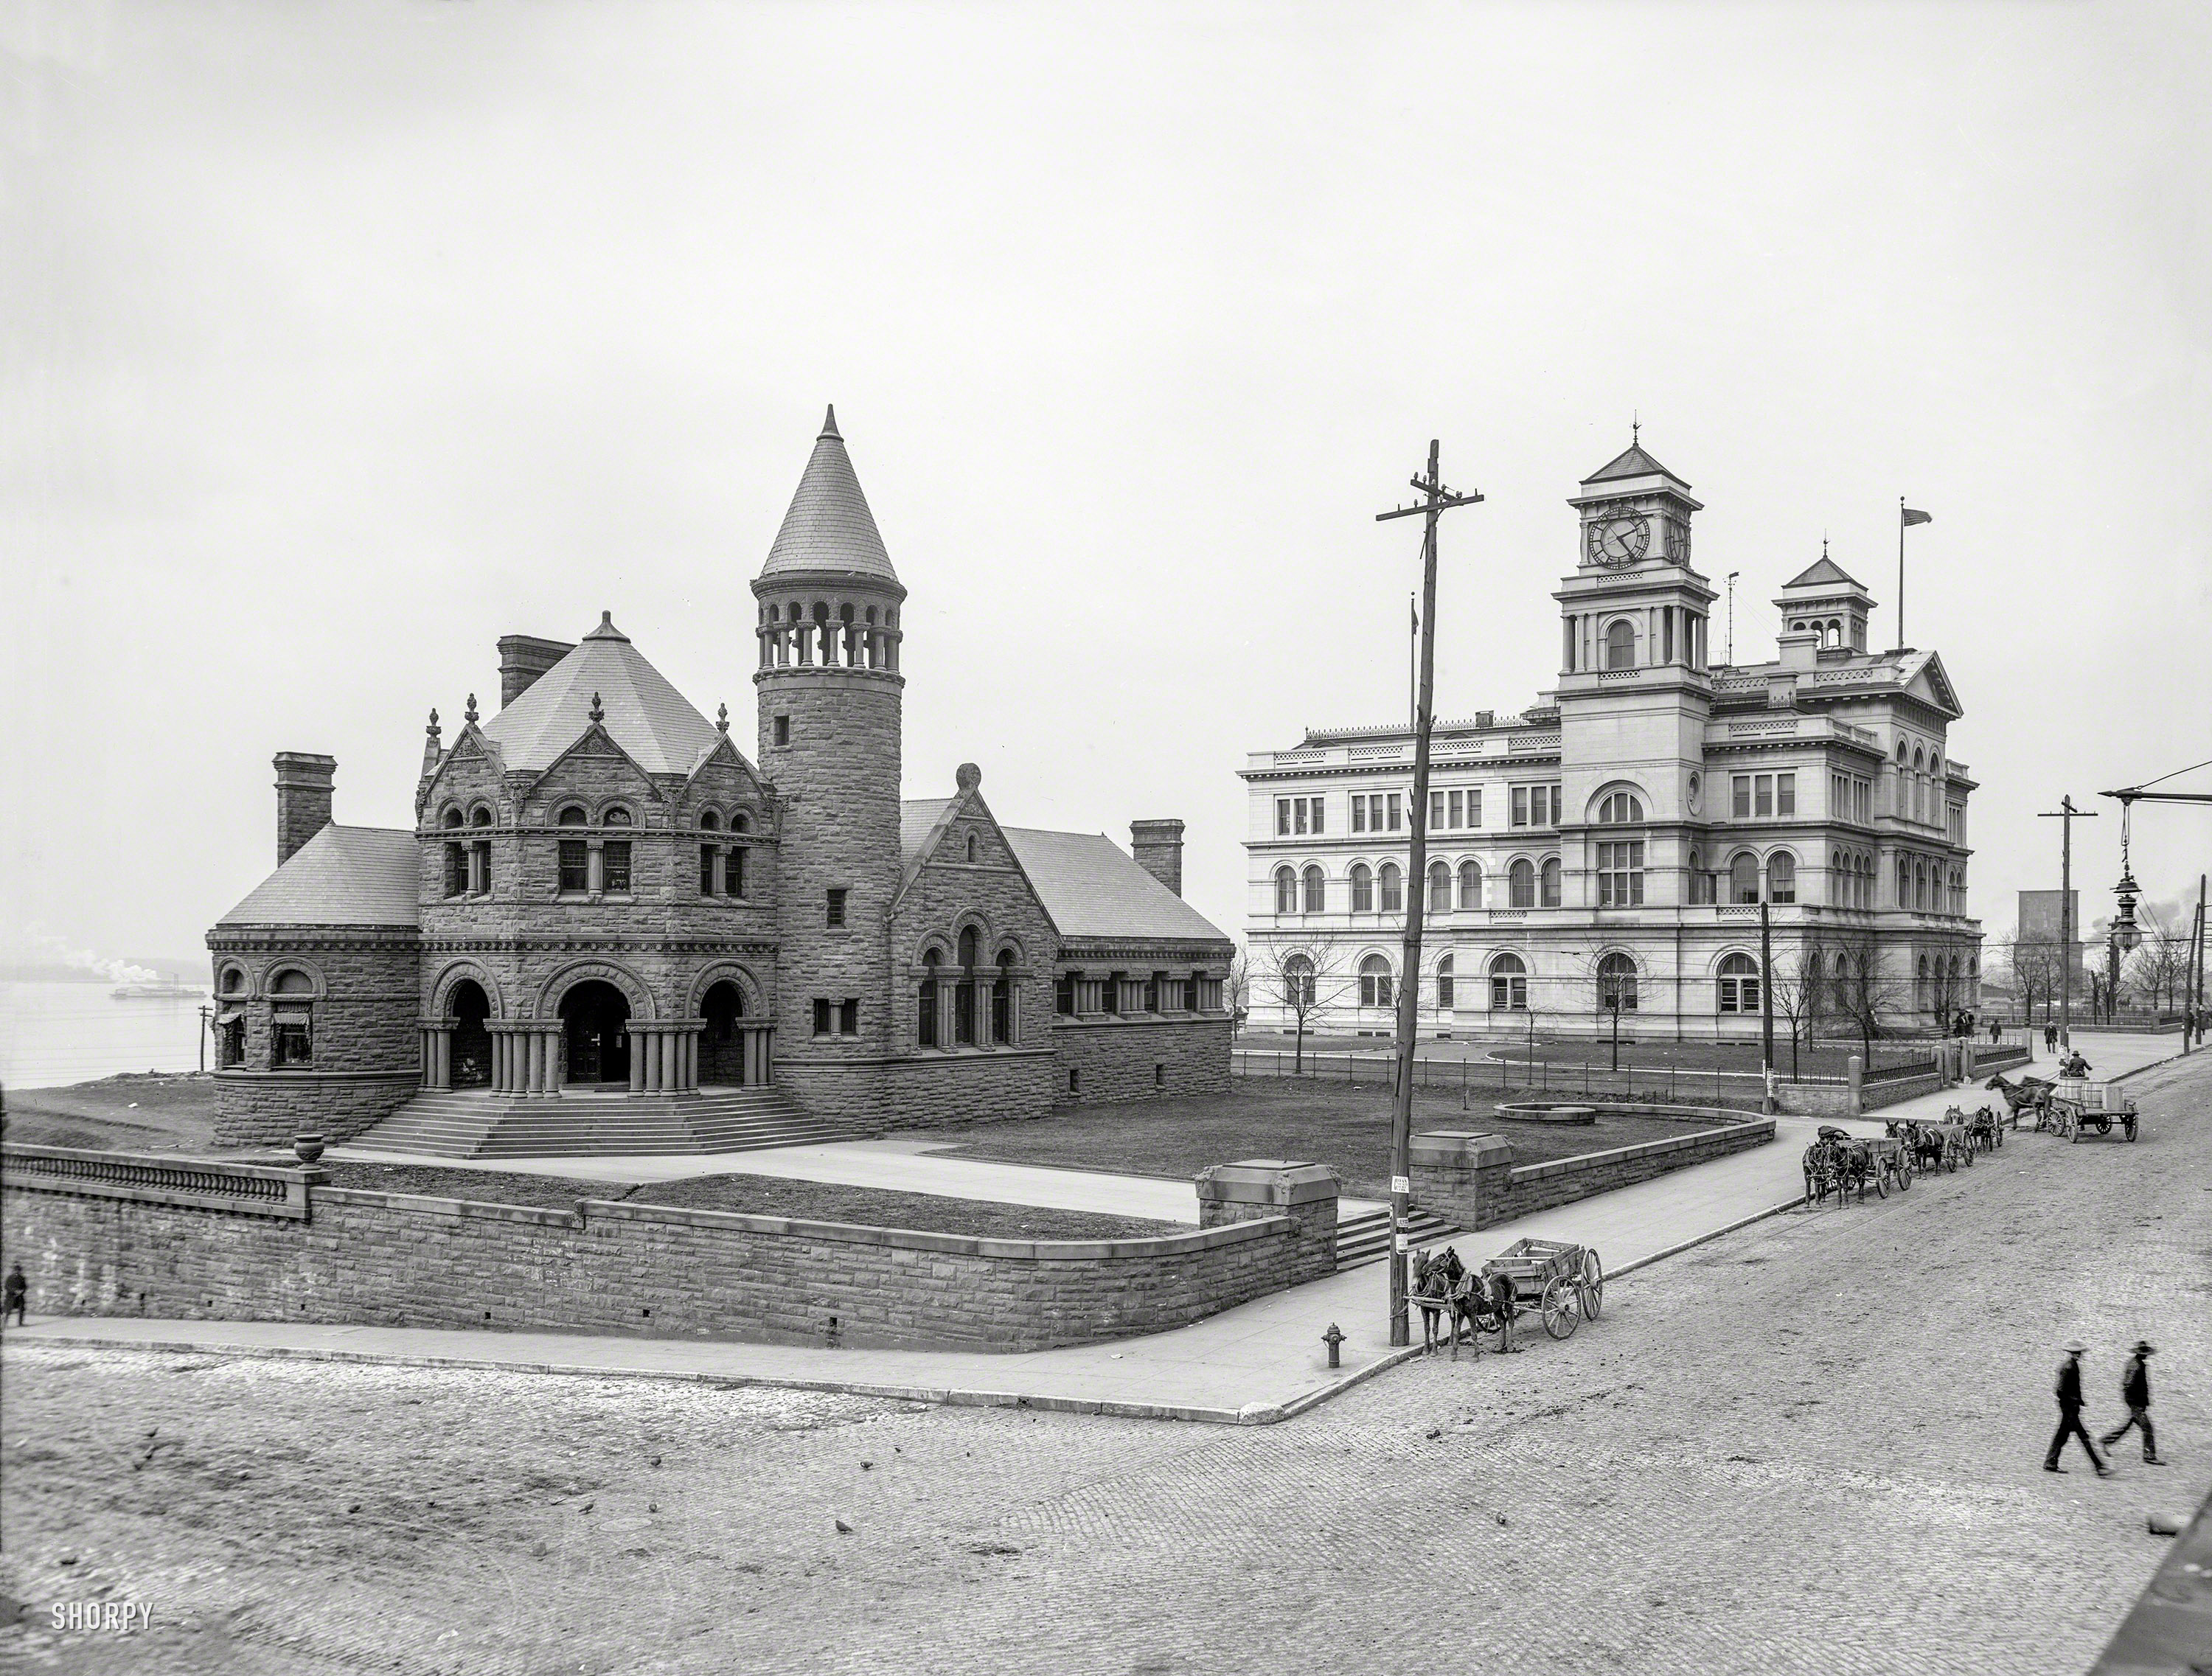 1906. "Cossitt Library and Post Office, Memphis, Tennessee." This Romanesque castle in red sandstone, at Front and Monroe on the banks of the Mississippi, was the city's first public library when it opened in 1893. View full size.